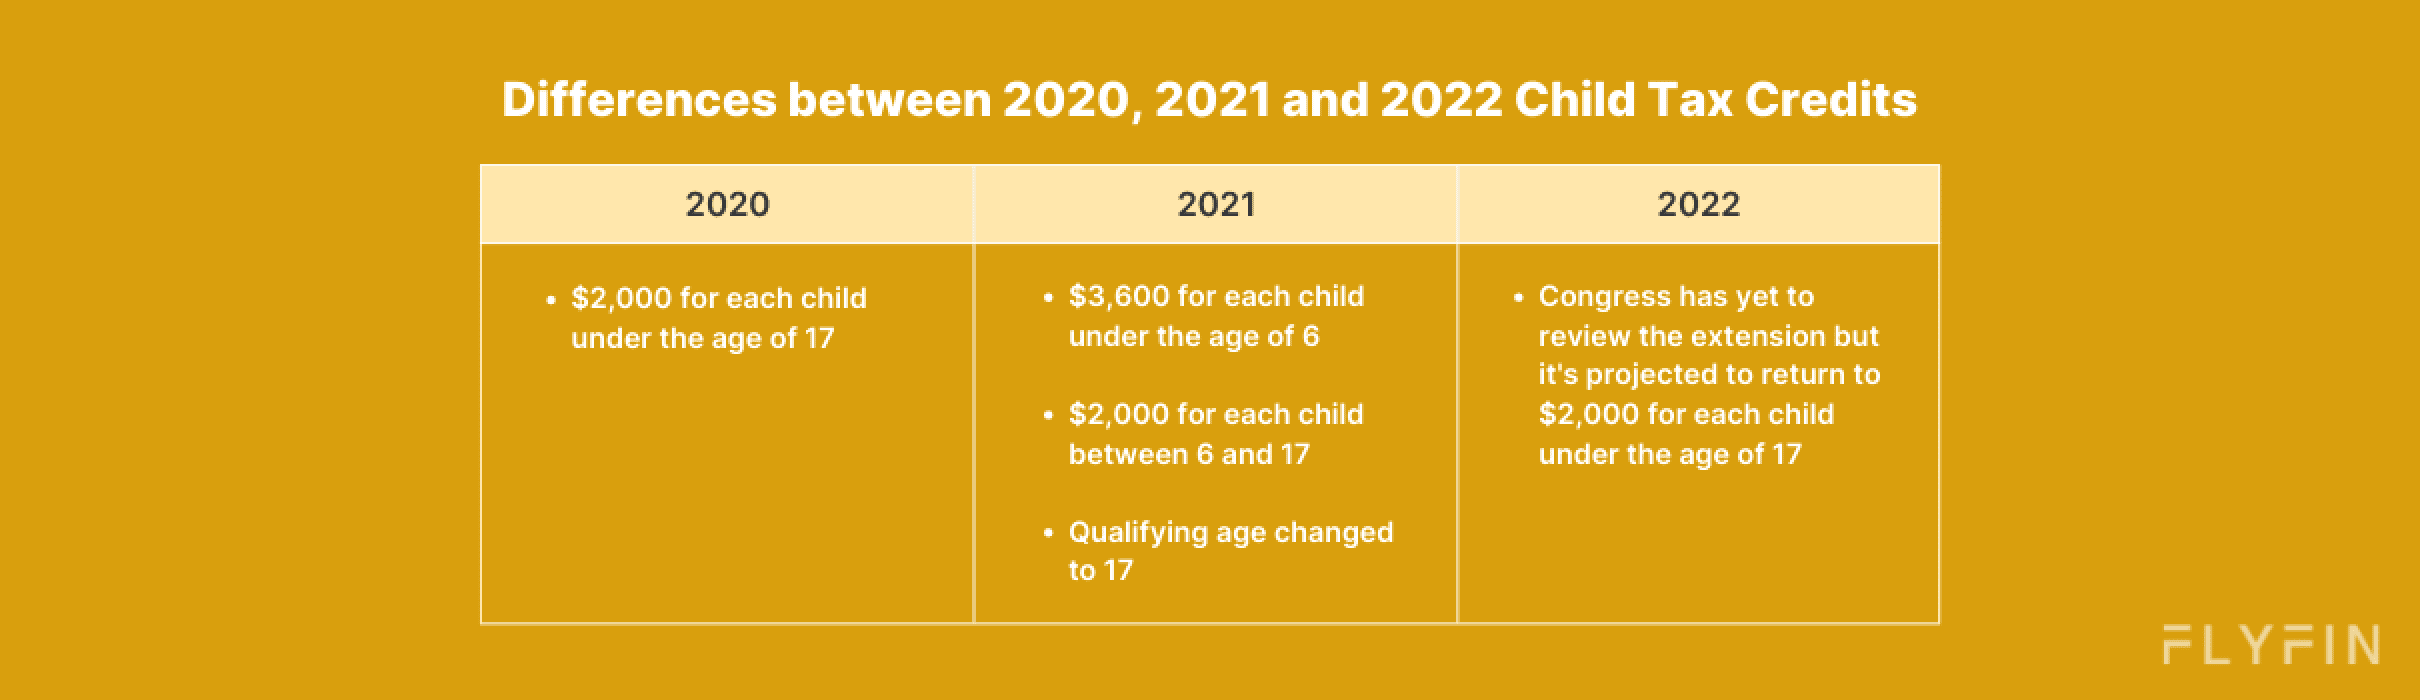 Image shows changes in Child Tax Credits from 2020 to 2022. $3,600 for kids under 6 in 2021, $2,000 for 6-17. 2022 may see $2,100 for kids under 17.